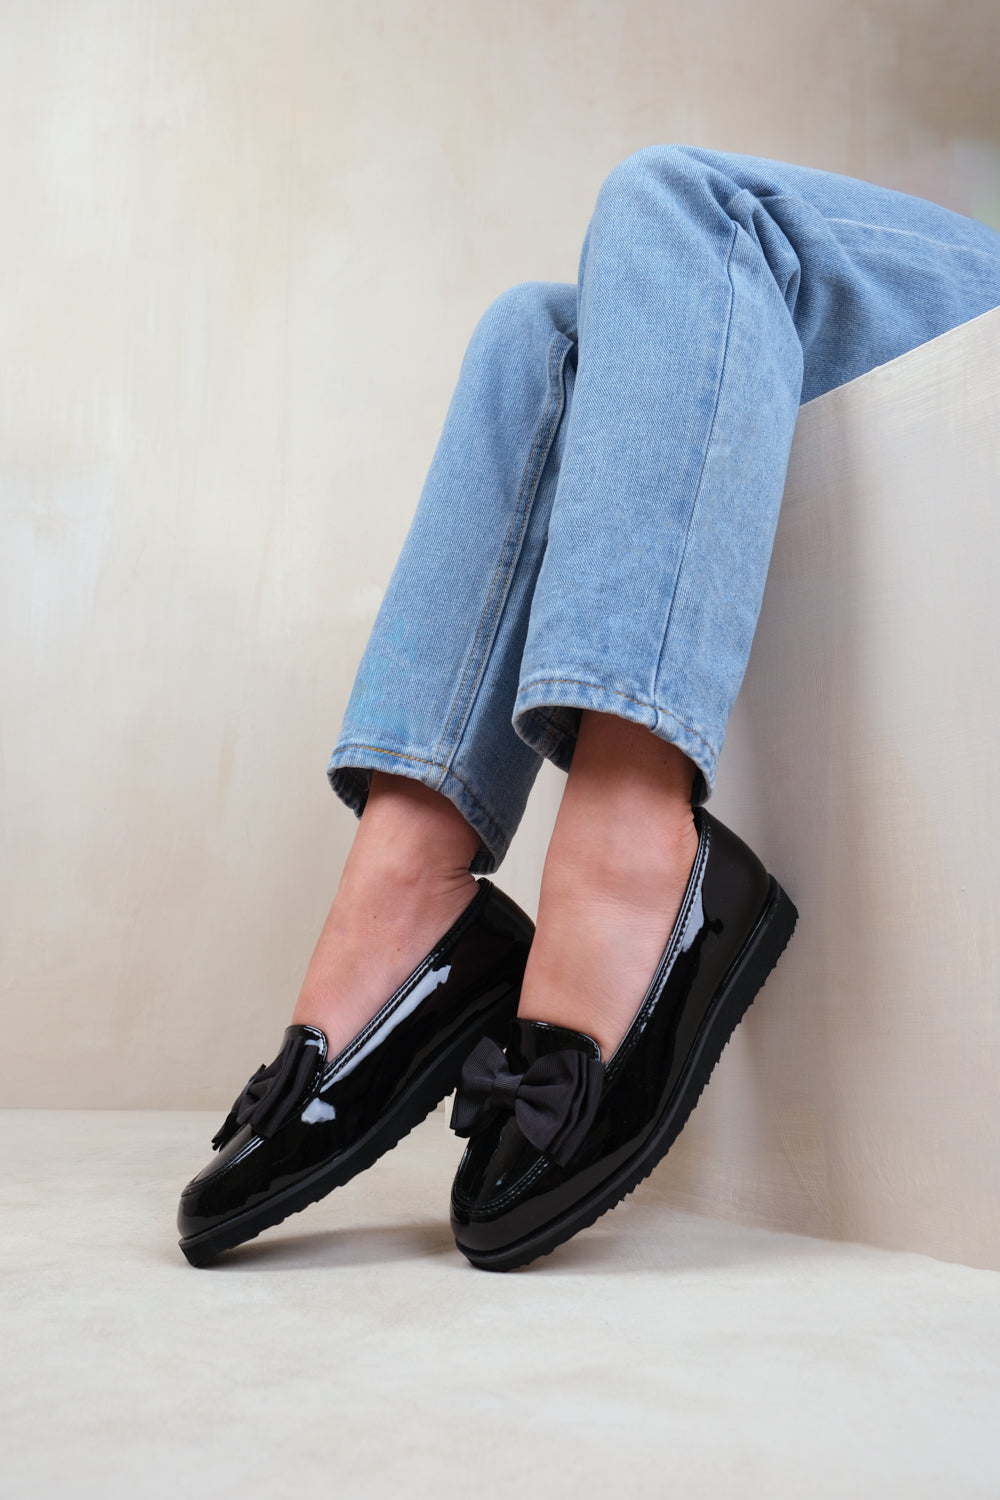 ALPHA EXTRA WIDE FIT SLIP ON LOAFER SLIDER WITH BOW DETAIL IN BLACK PATENT FAUX LEATHER